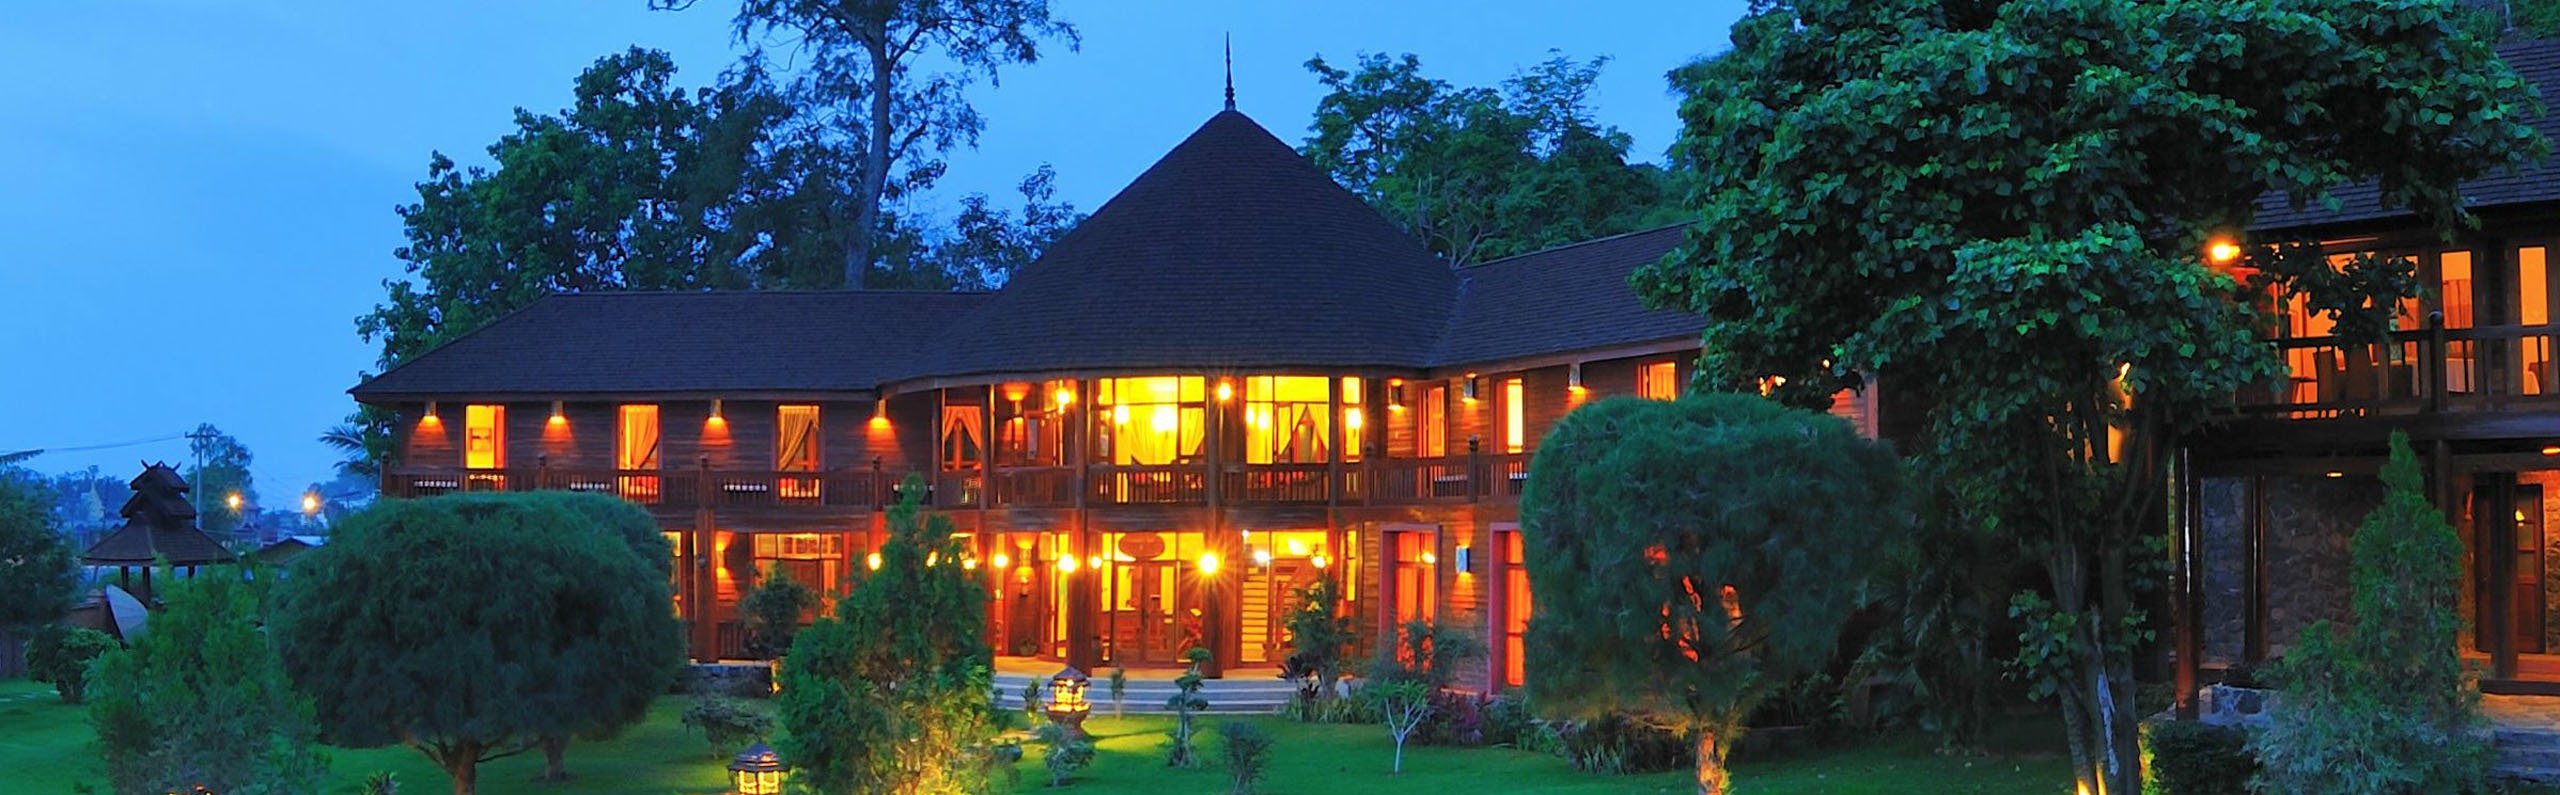 Top Hotels at Inle Lake - Resorts on the Shore of the Lake